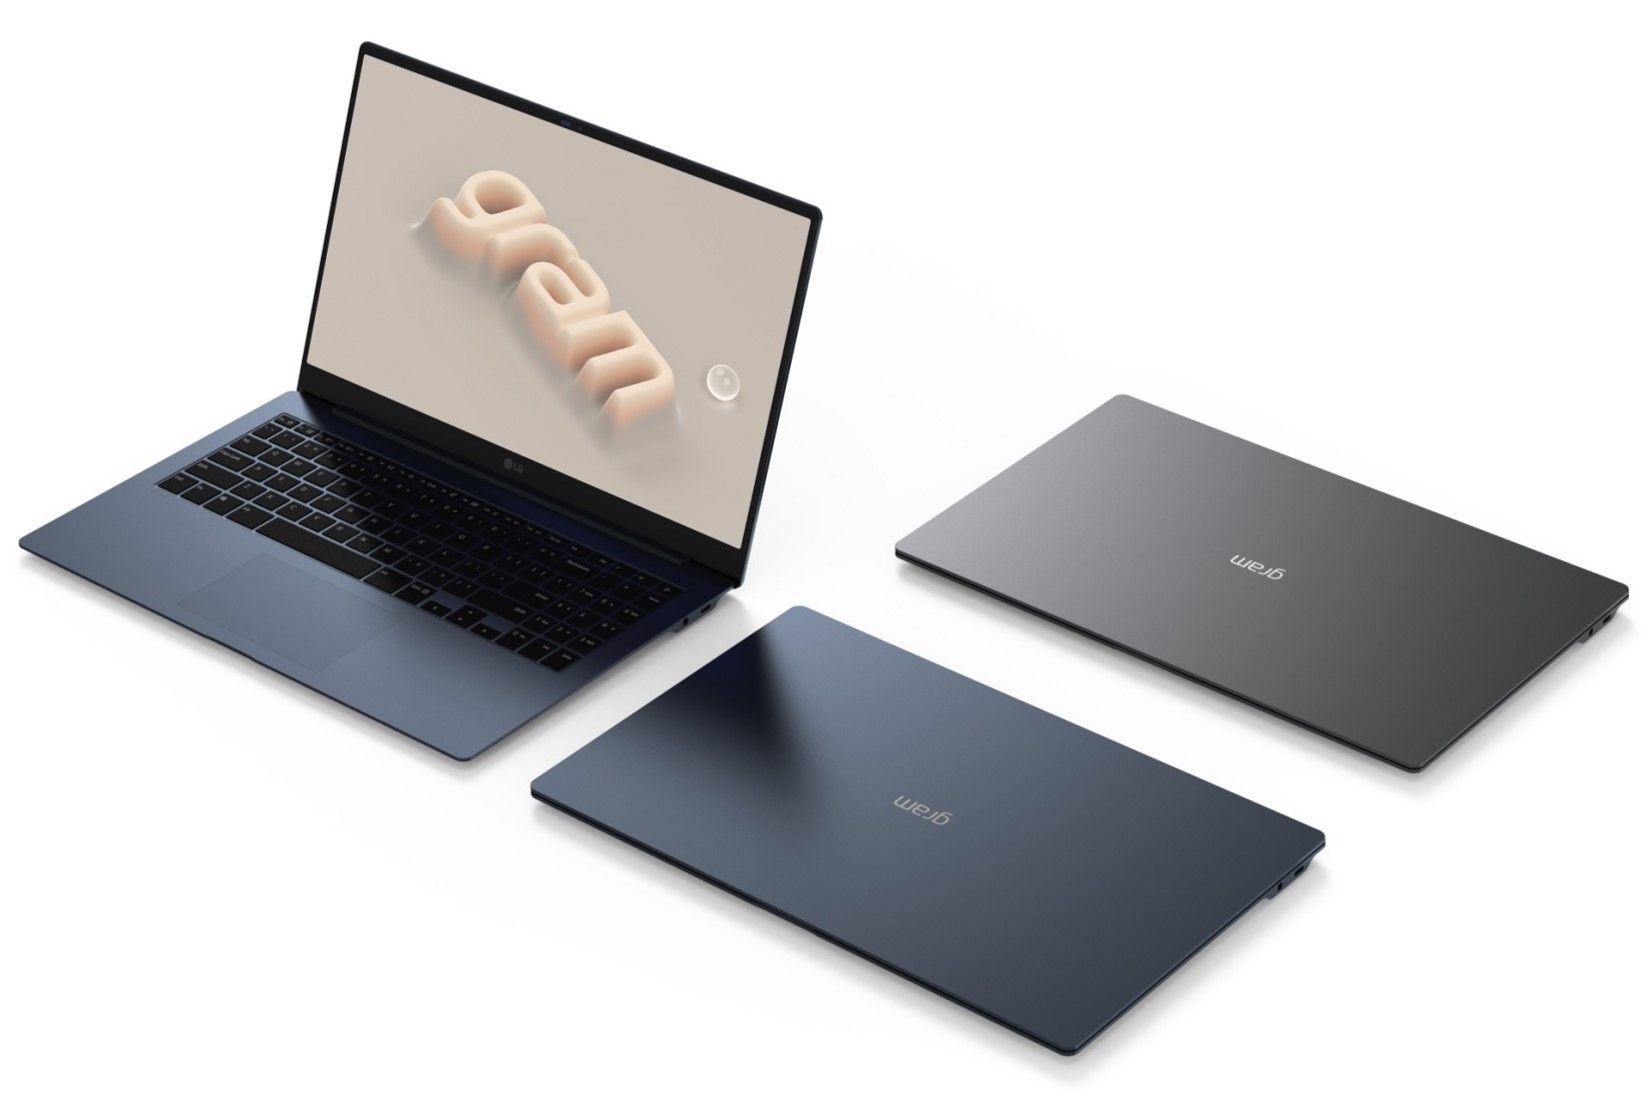 Three LG gram Ultraslim laptops on a white background. Two of the laptops have the lid closed and different colors, one being dark blue and the other being dark grey. The third laptop is also blue but has the lid open at 100 degrees.